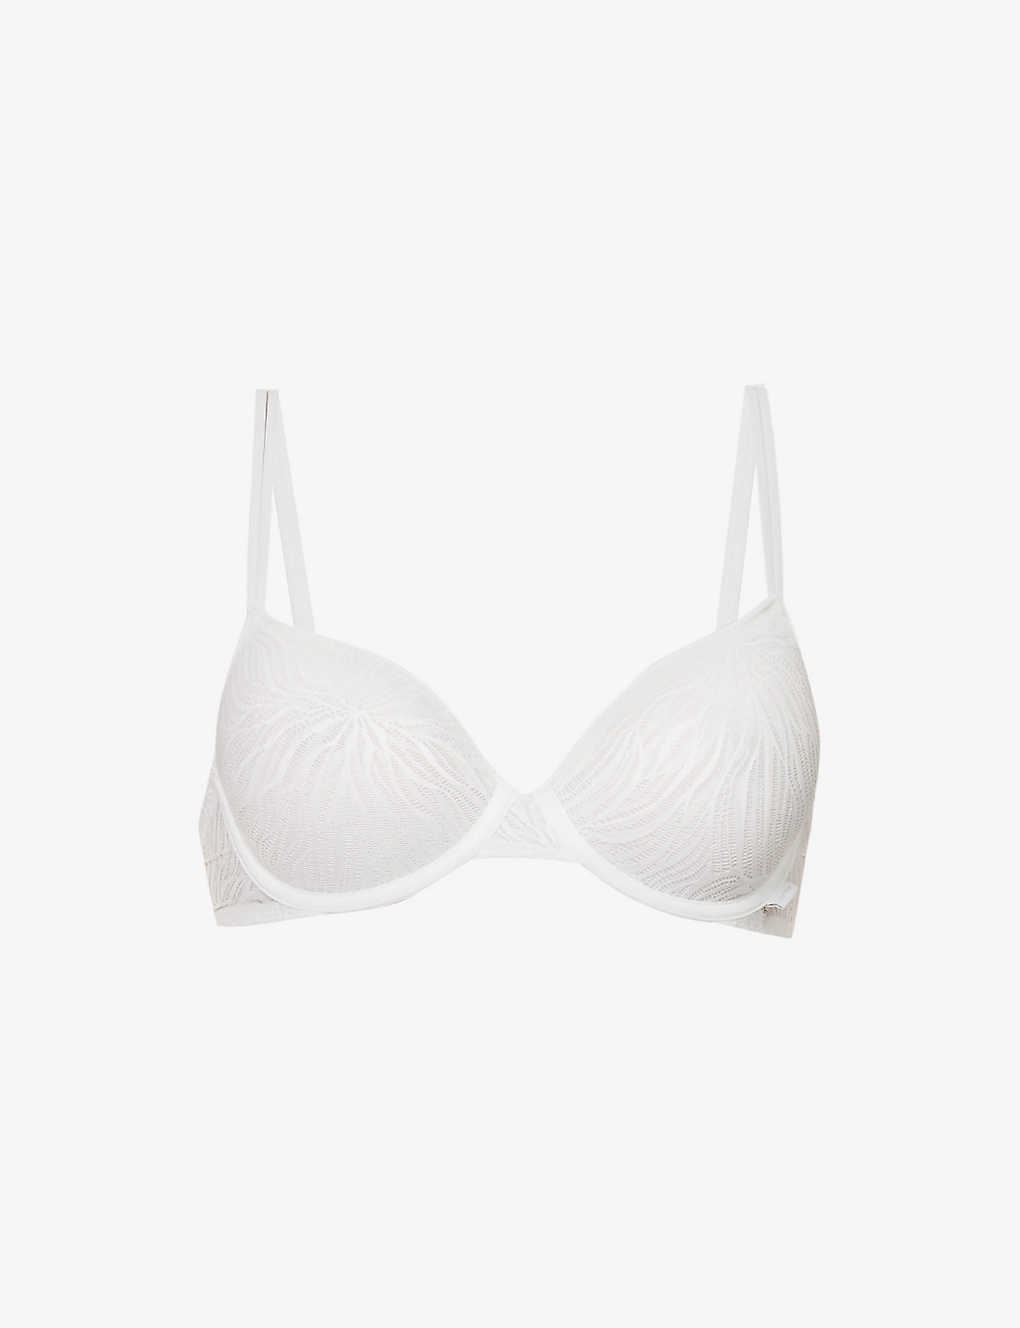 Shop Calvin Klein Women's White Sheer Marquisette Floral-embroidered Stretch-lace Bra